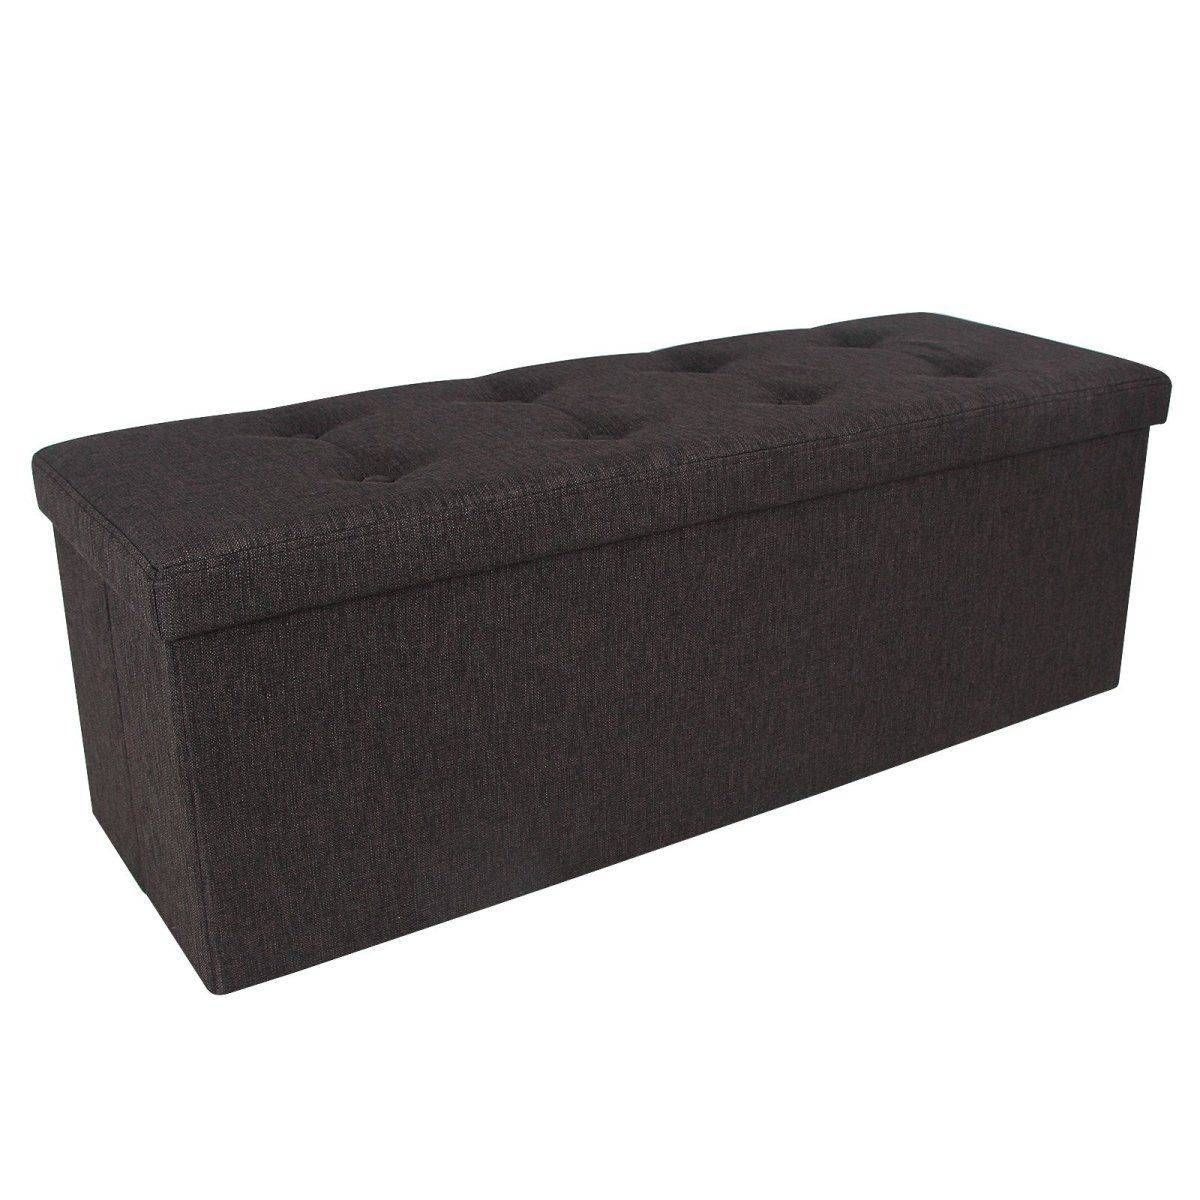 Homcom Pu Square Storage Stool Footrest Ottoman Seat Organizer Intended For Footstool Pouffe Sofa Folding Bed (View 8 of 25)